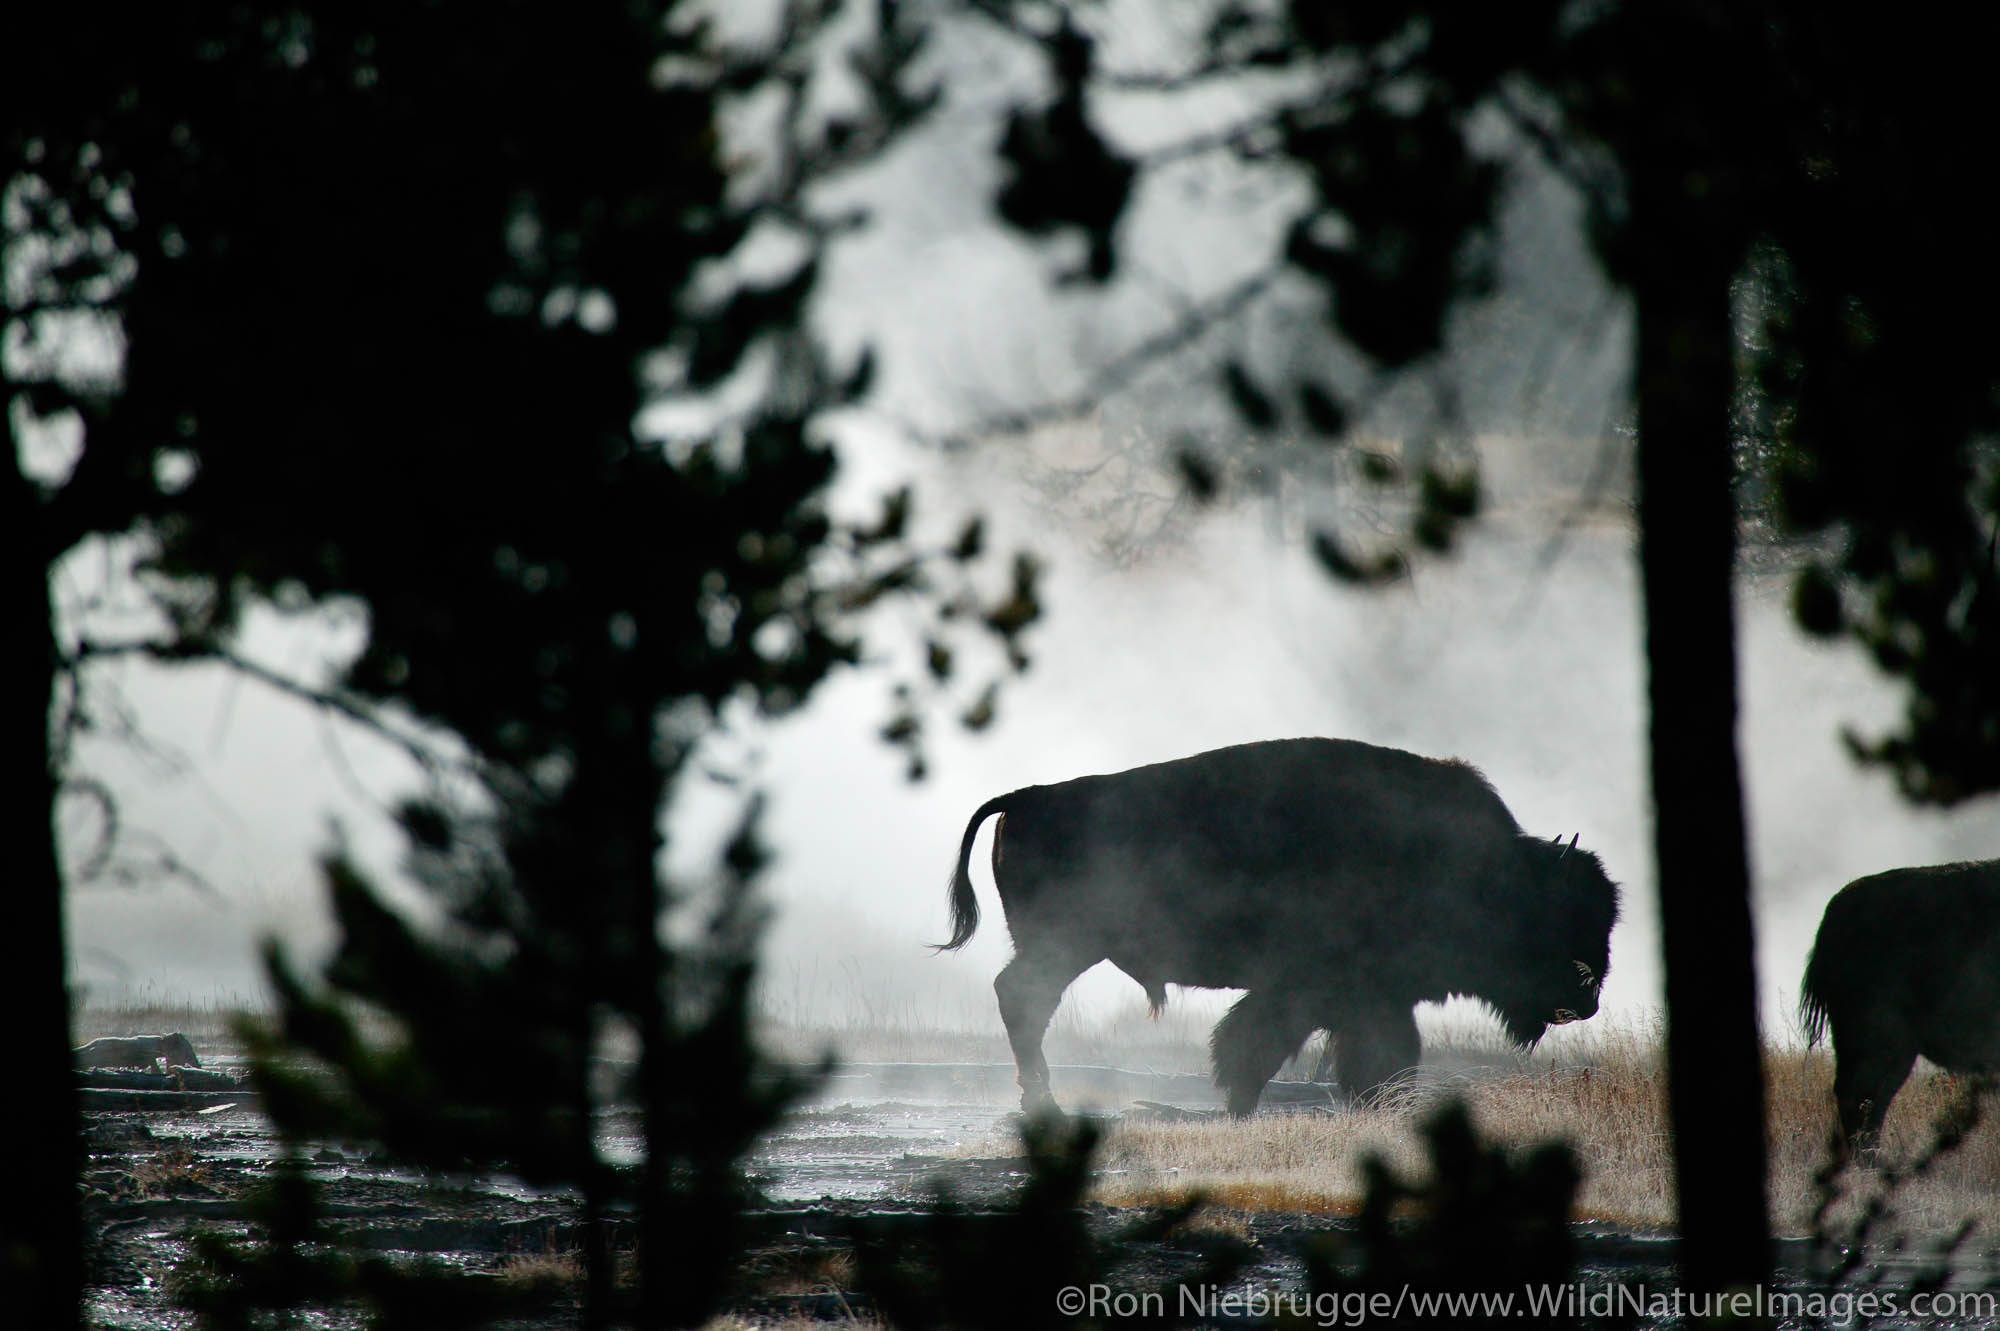 Bison in steam, Yellowstone National Park, Wyoming.